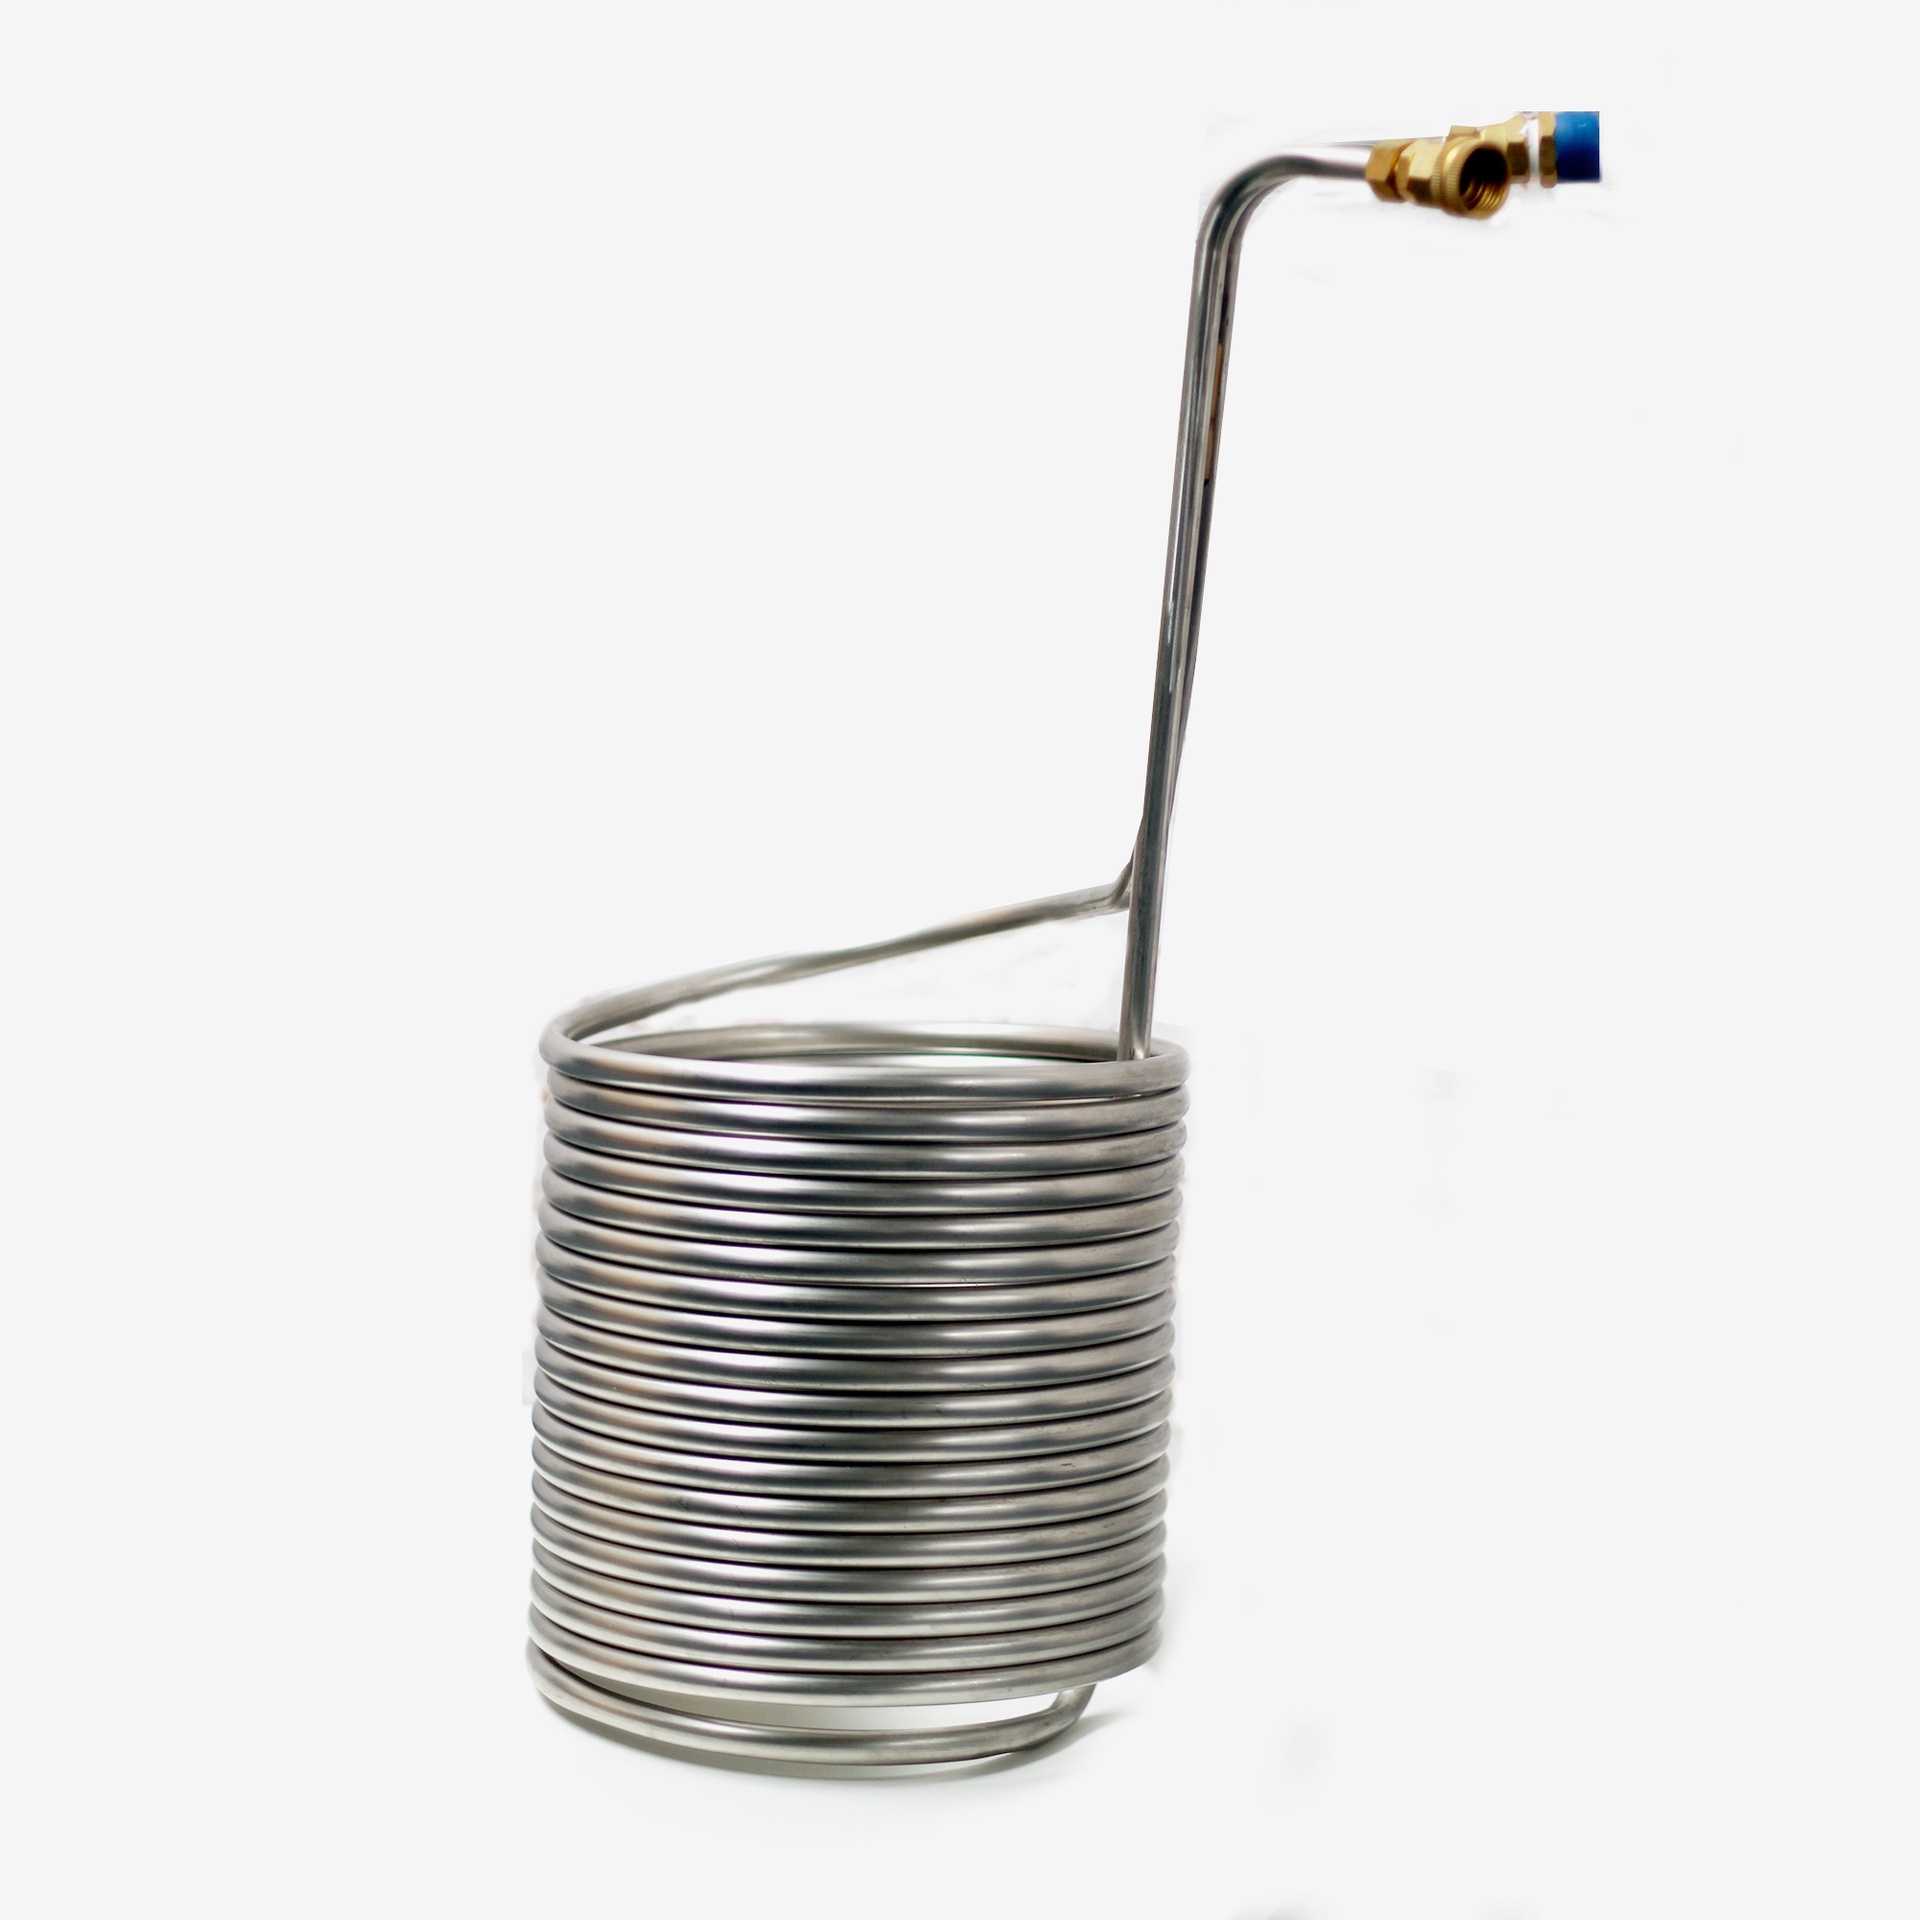 SISHUINIANHUA Stainless Steel Heat Exchangers Coil 1/2 & 3/8Port & Spiral Tube Coil,Beer/Wine Cooler for Homebrew Immersion Wort Chiller 